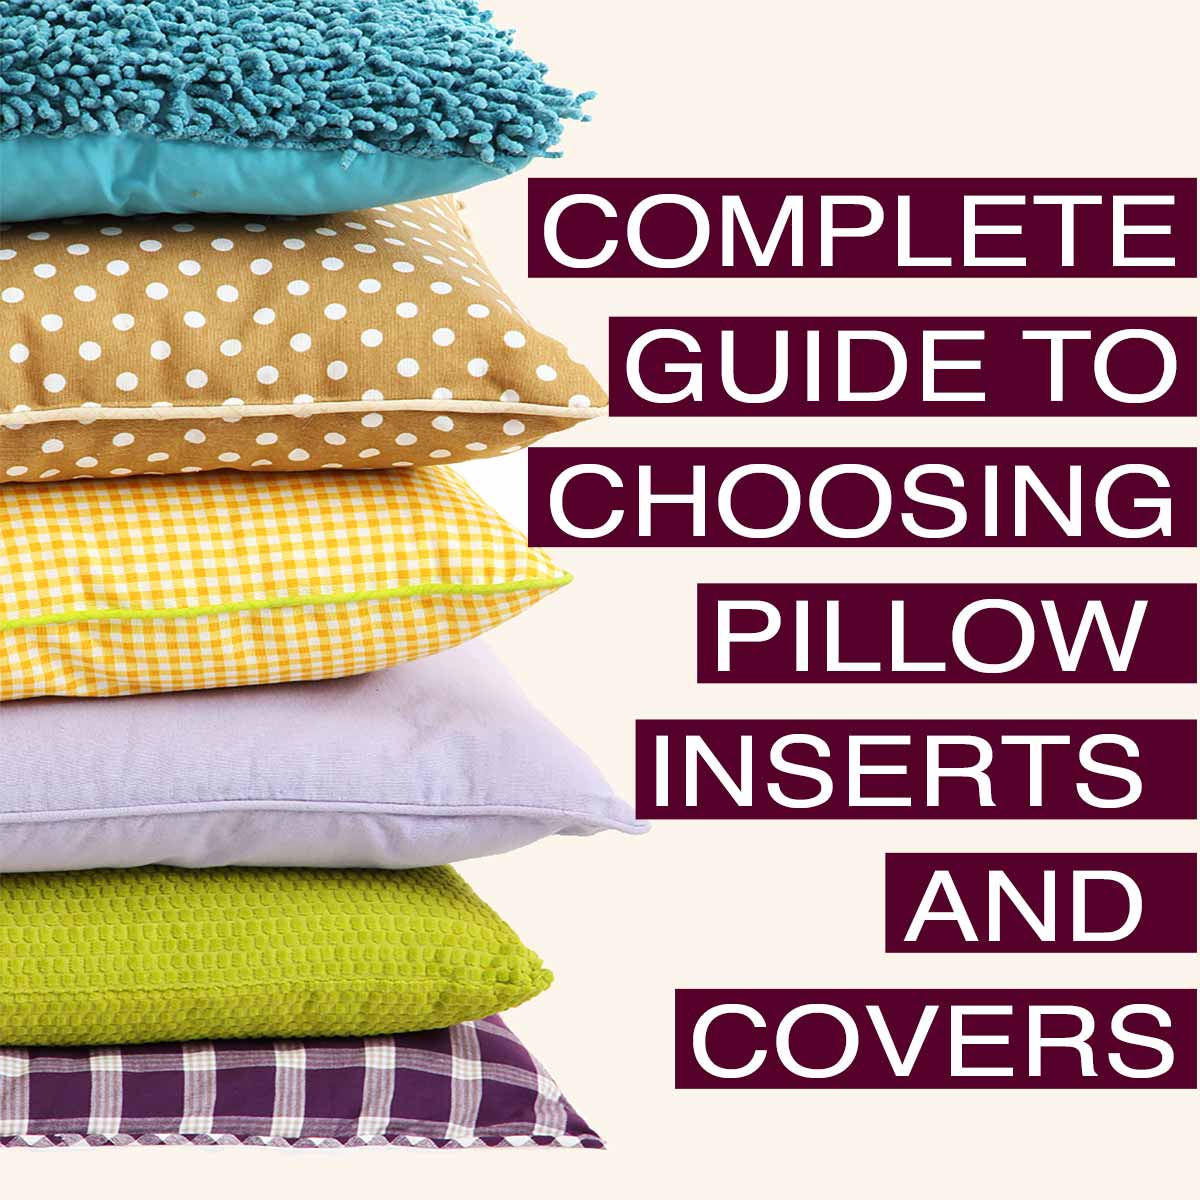 Title: Outdoor Pillow Inserts, Choose Your Size, Cotton or